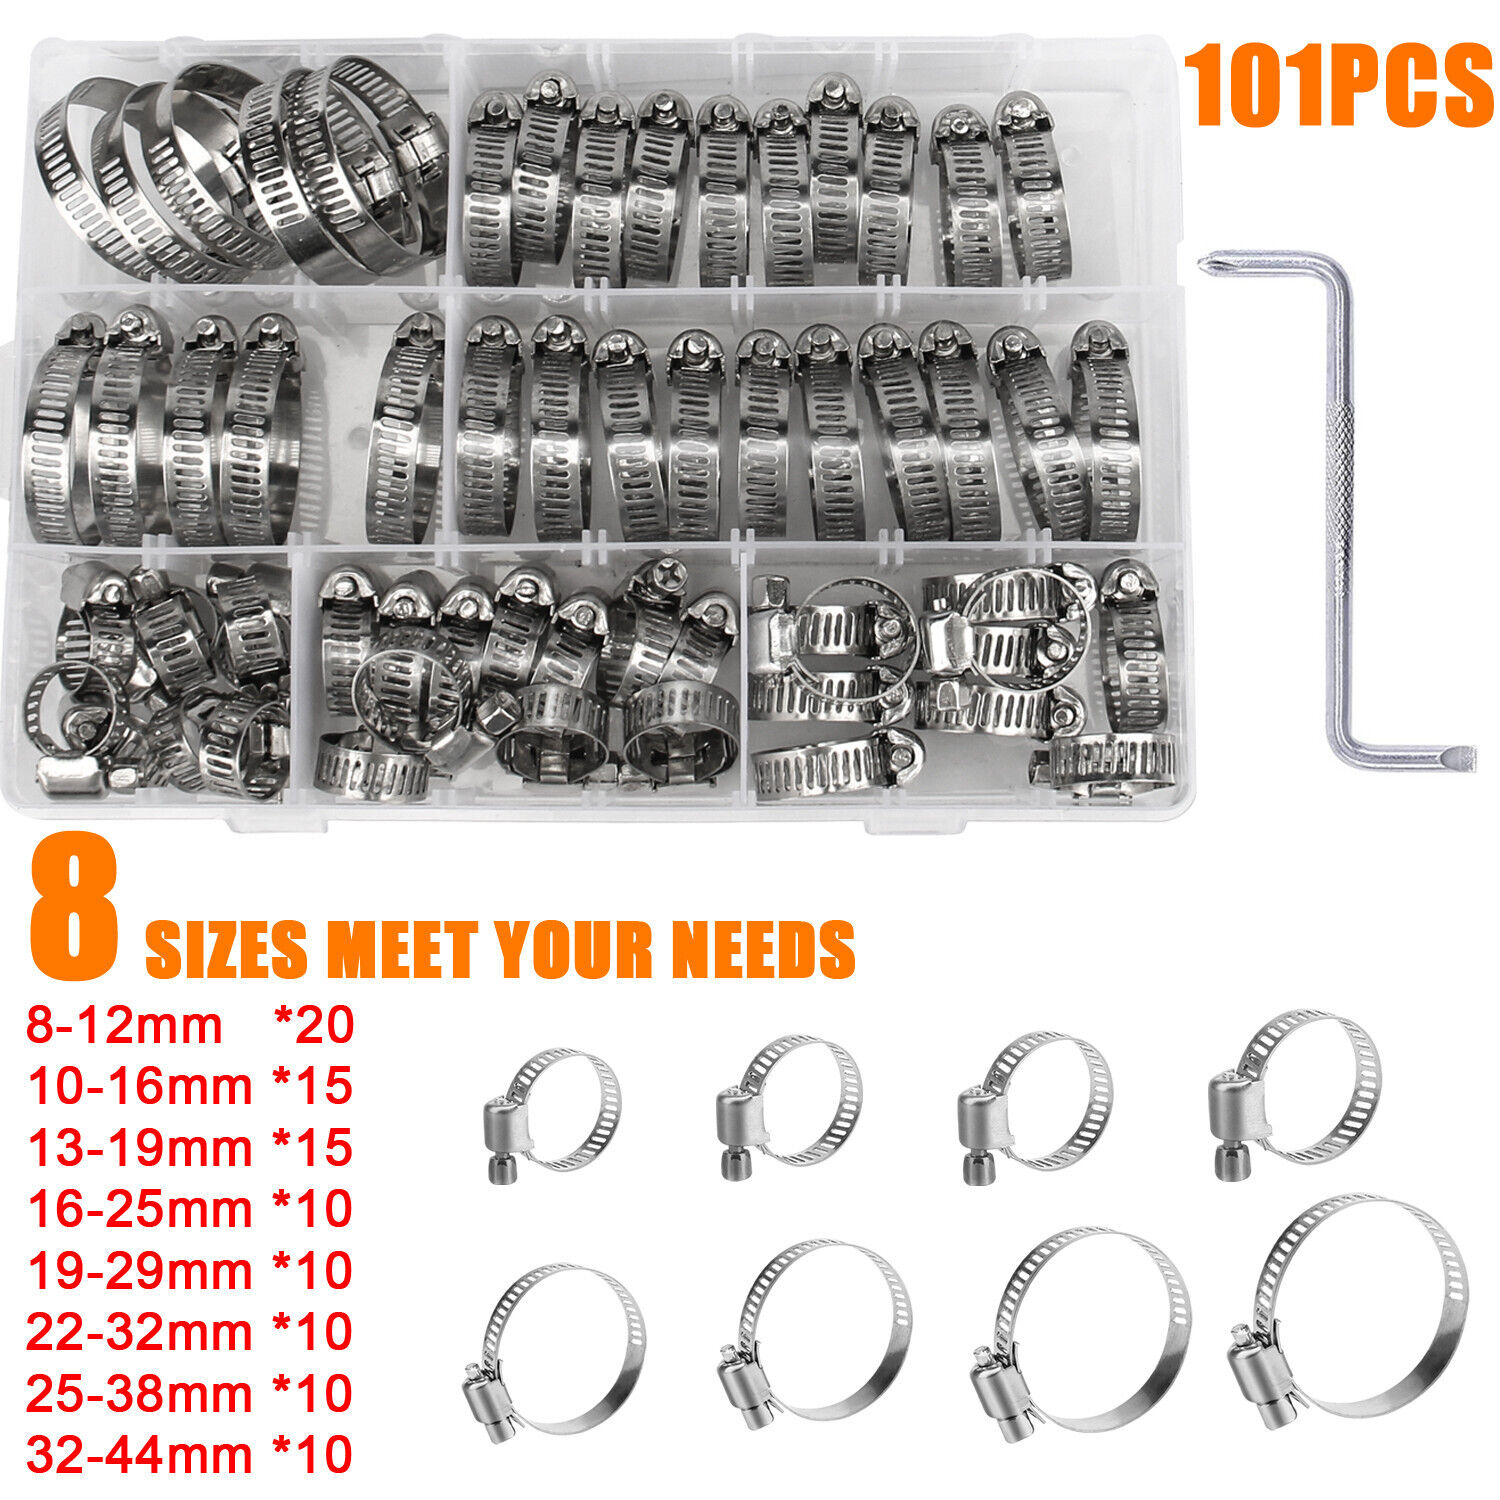 101pcs Adjustable Hose Clamps Worm Gear Stainless Steel Clam